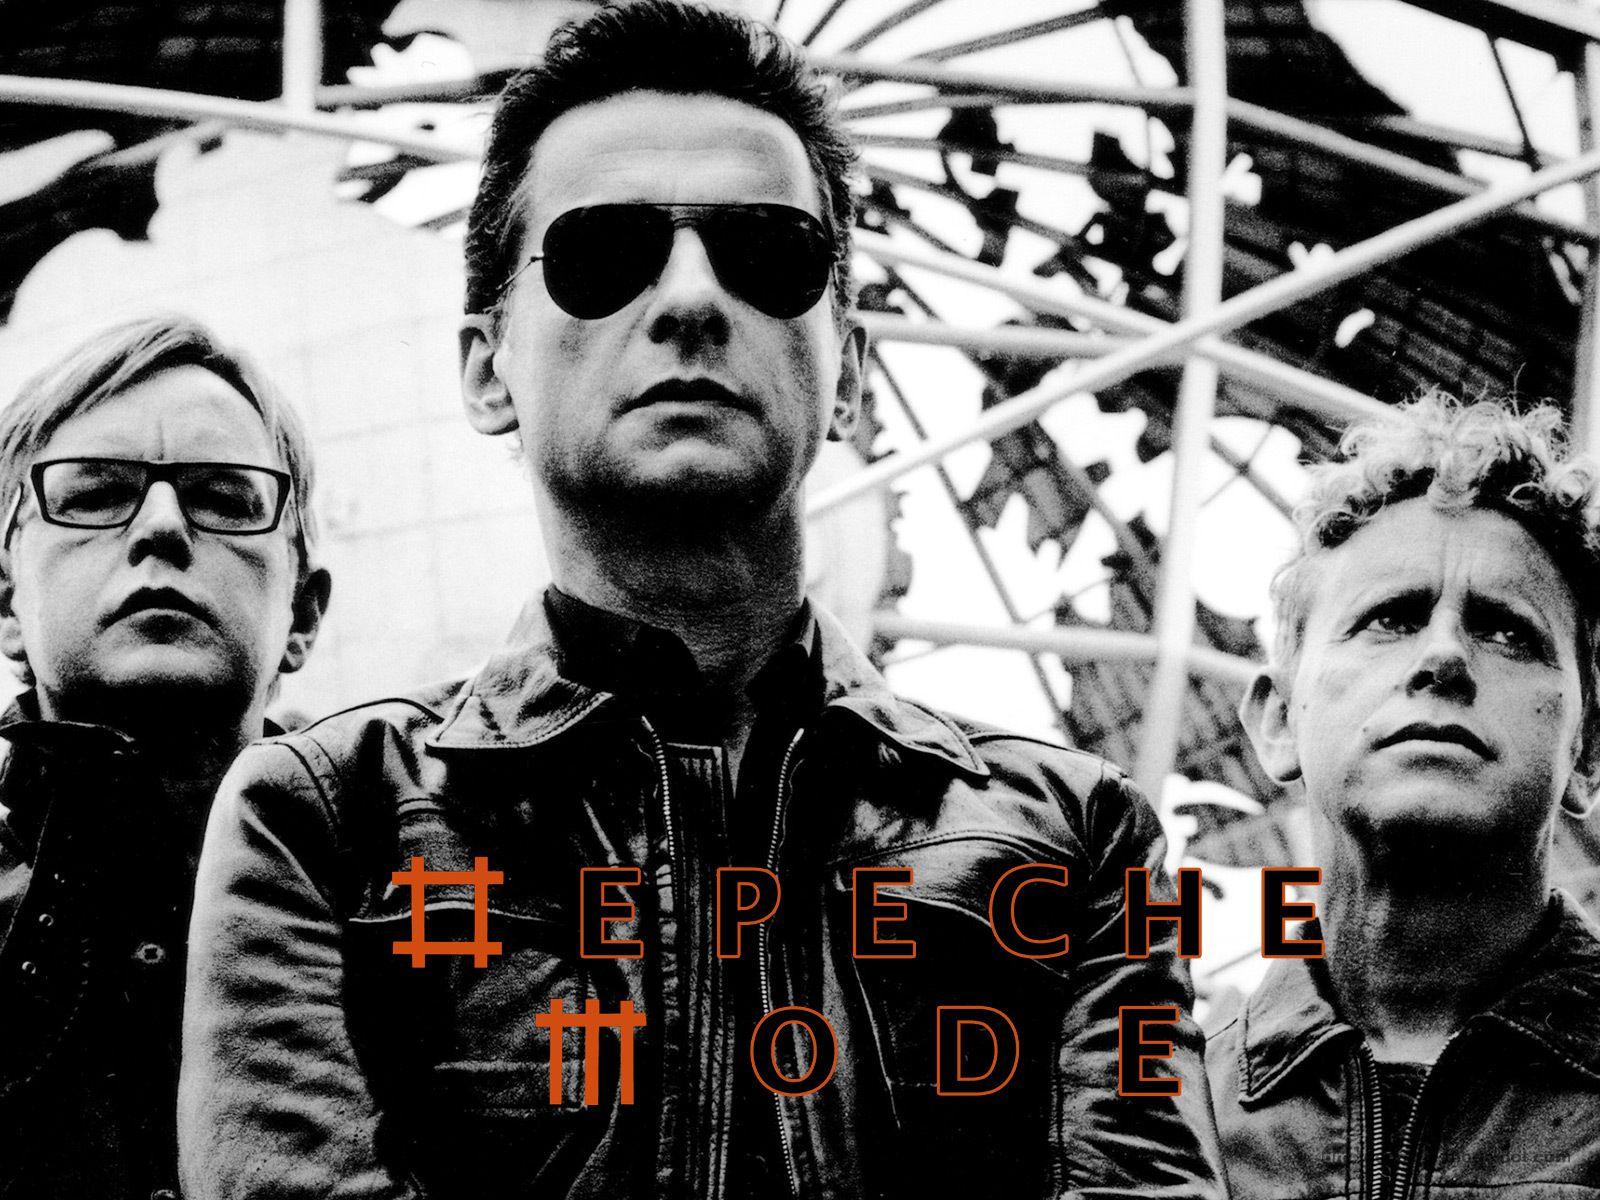 image about Depeche Mode. Enjoy the silence